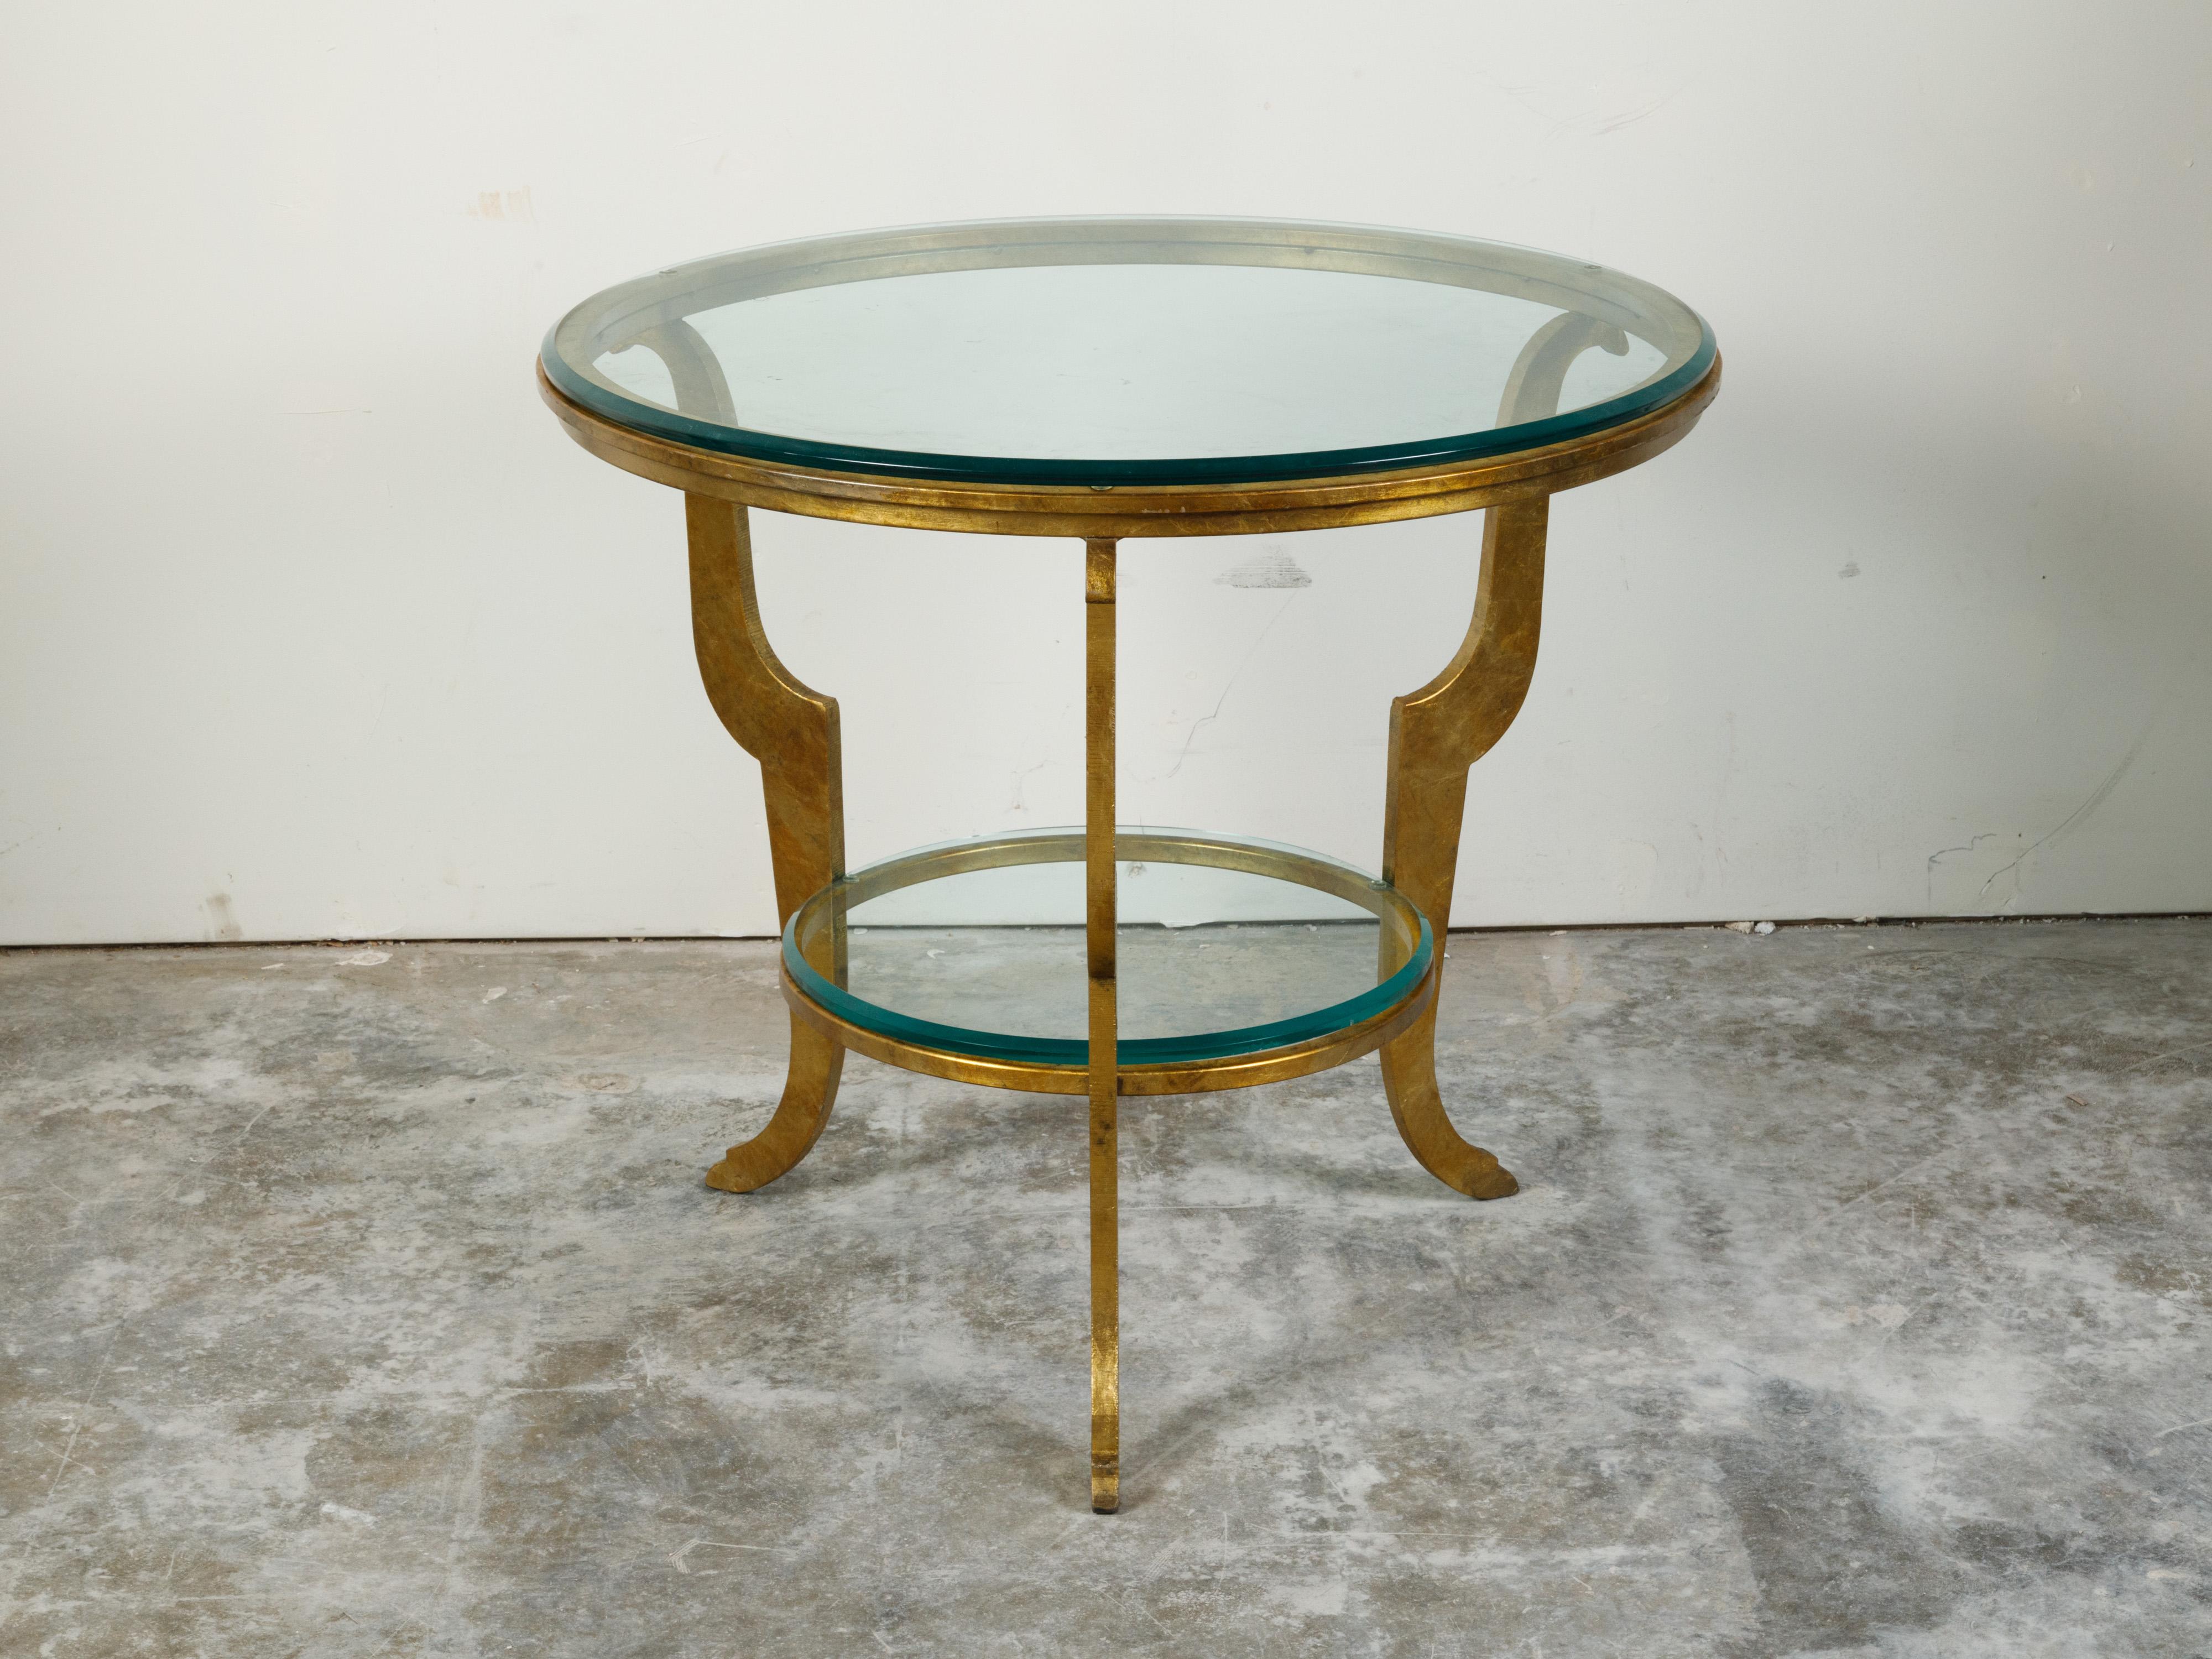 French Midcentury Gilt Iron Center Table with Glass Top and Scrolling Legs 1